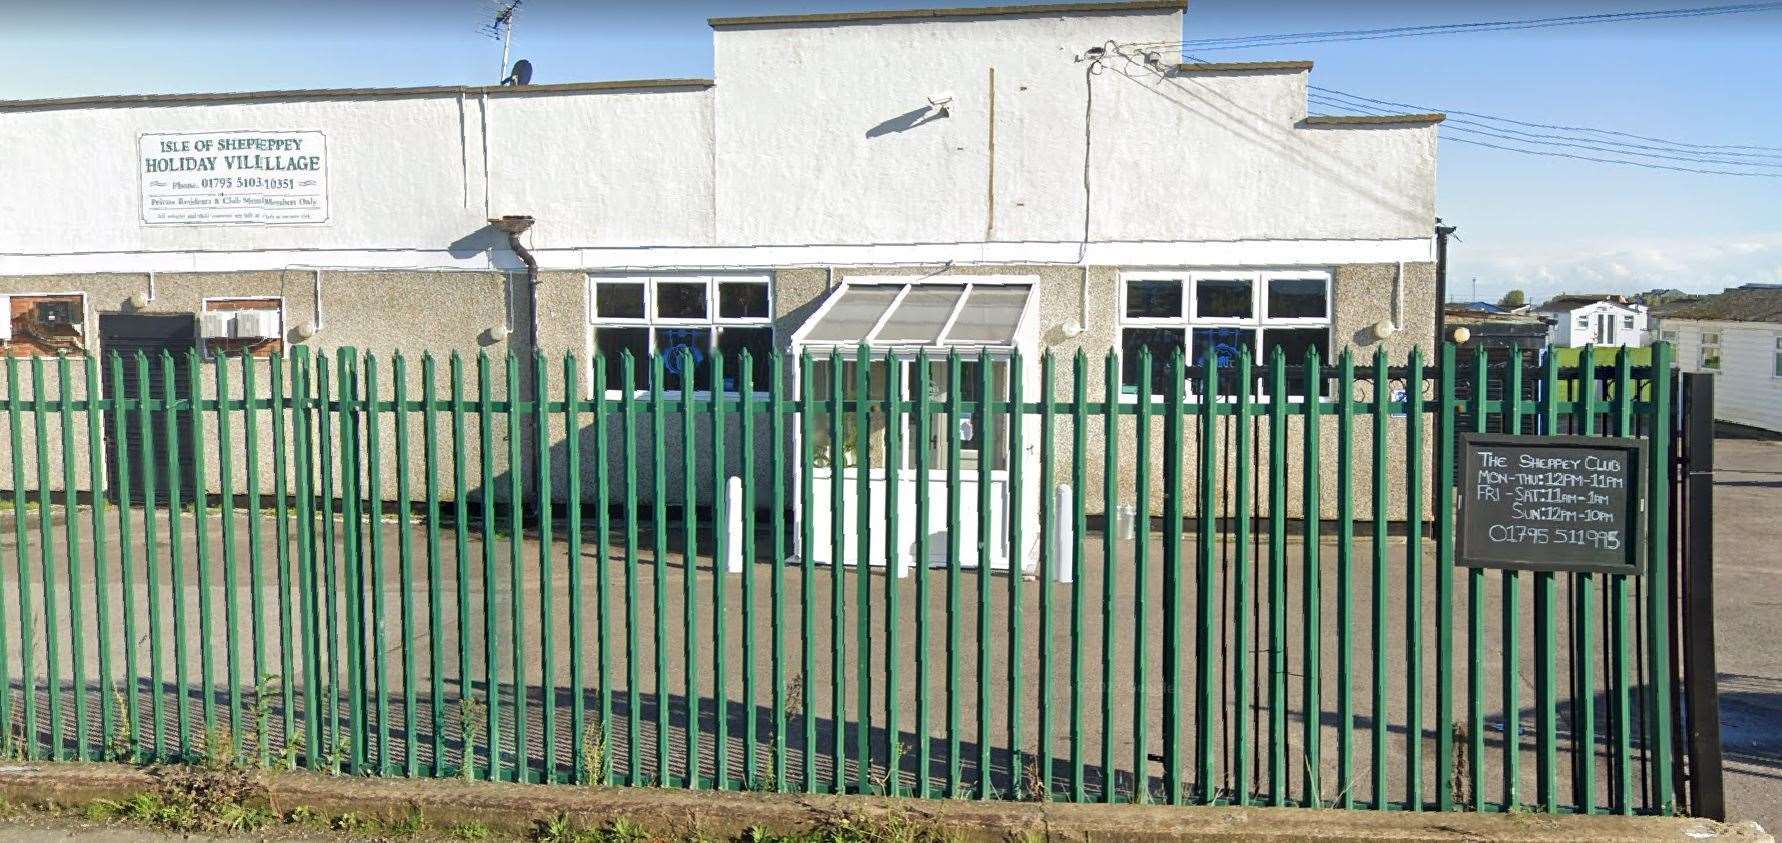 The Sheppey Club. Picture: Google Maps